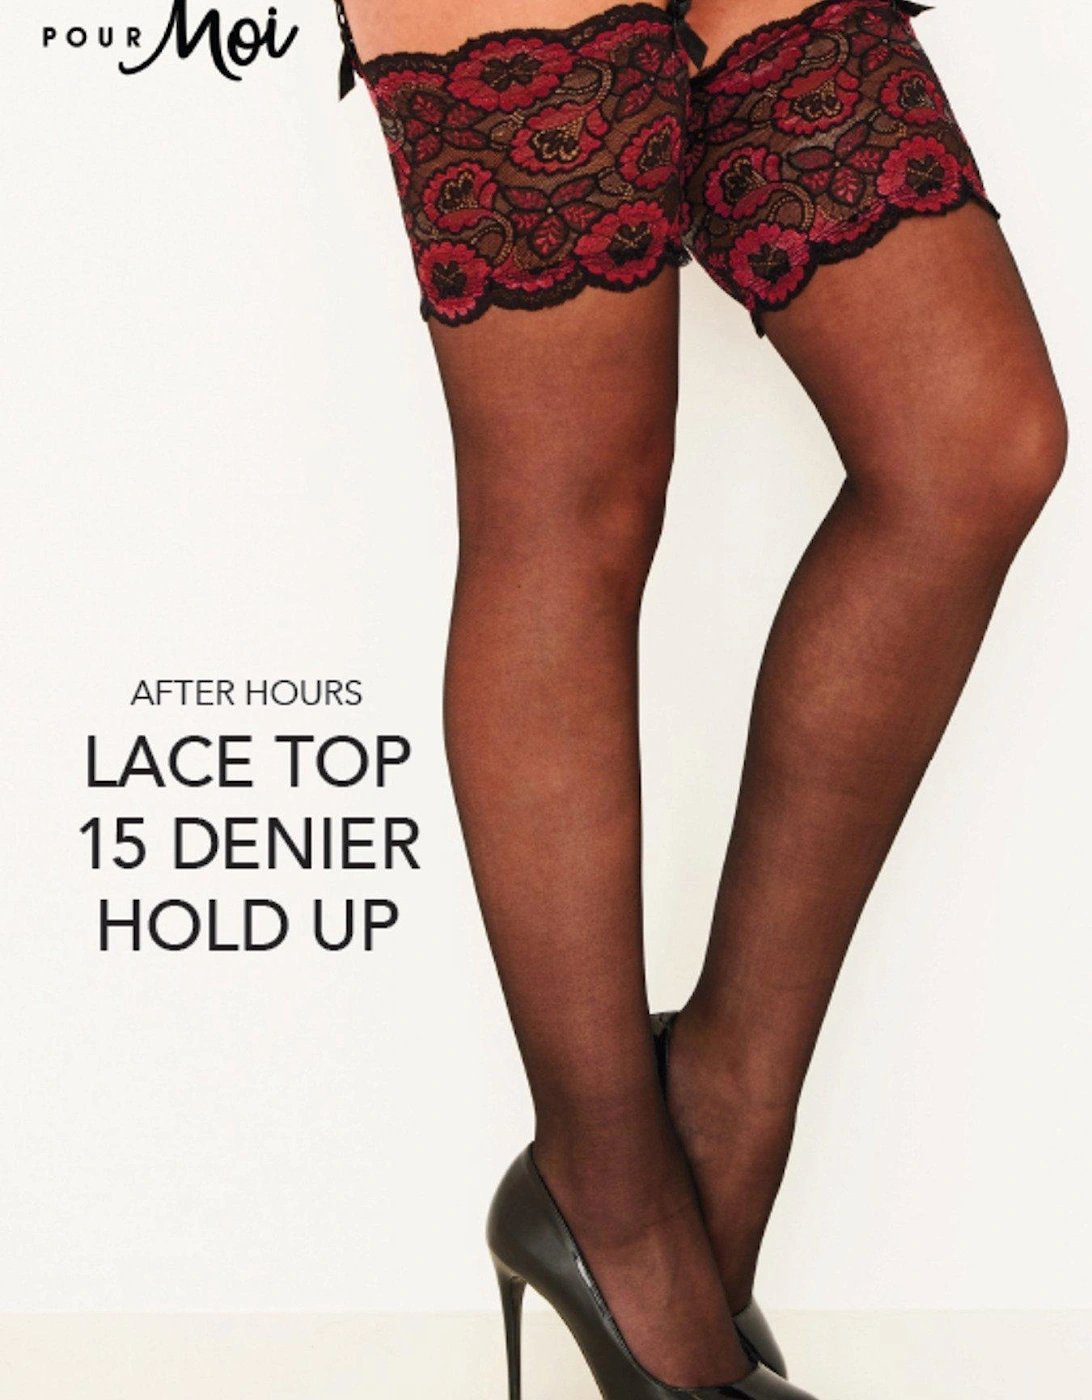 After Hours Lace Top 15 Denier Hold Up, 2 of 1